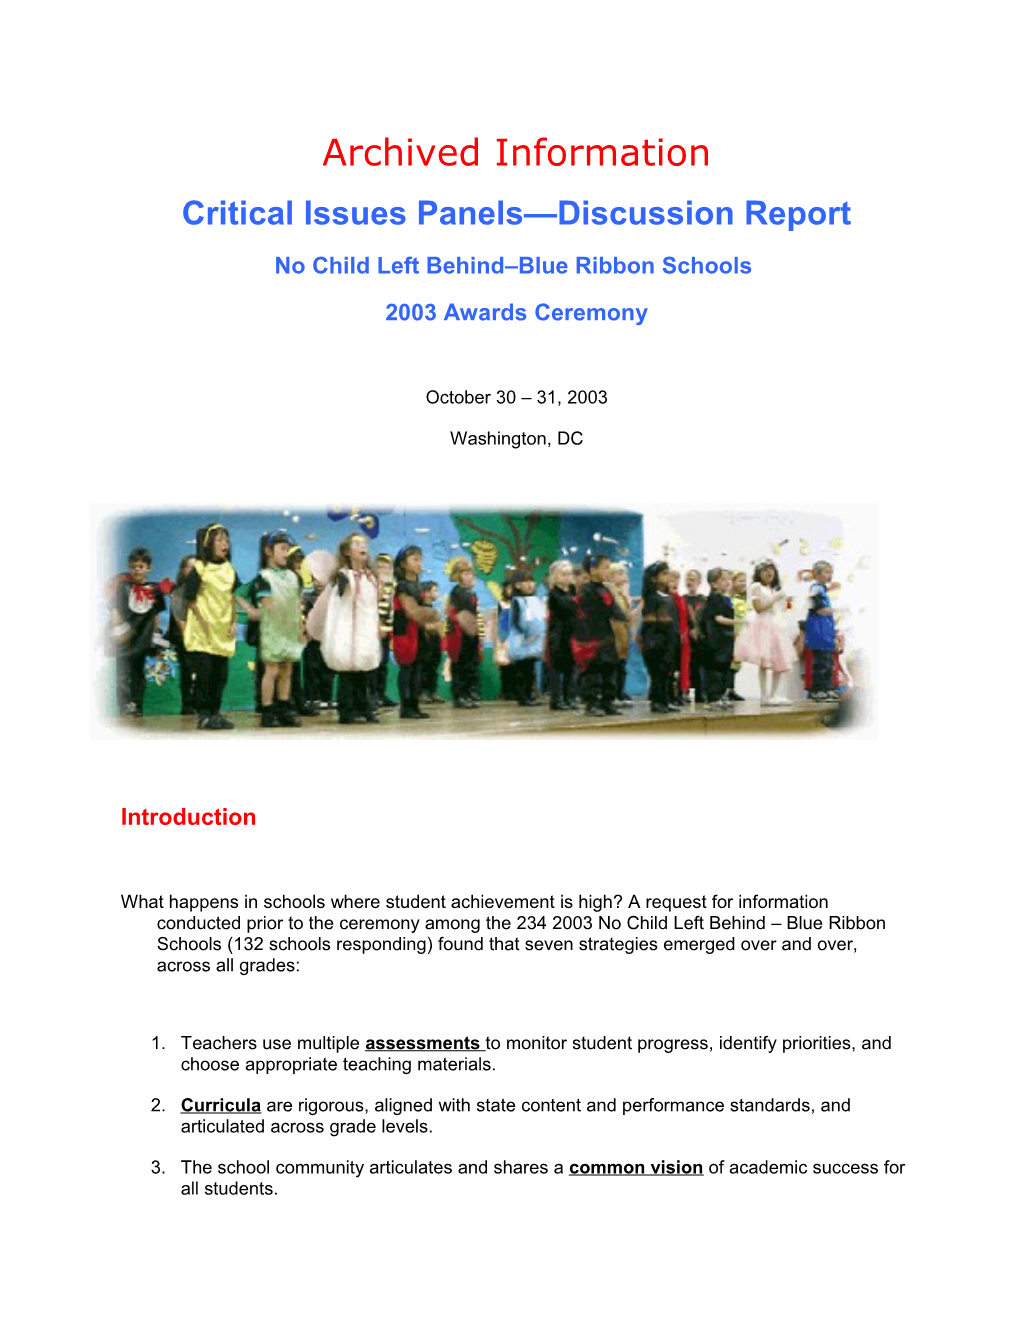 Archived: Critical Issues Panels-Discussion Report: No Child Left Behind-Blue Ribbon Schools